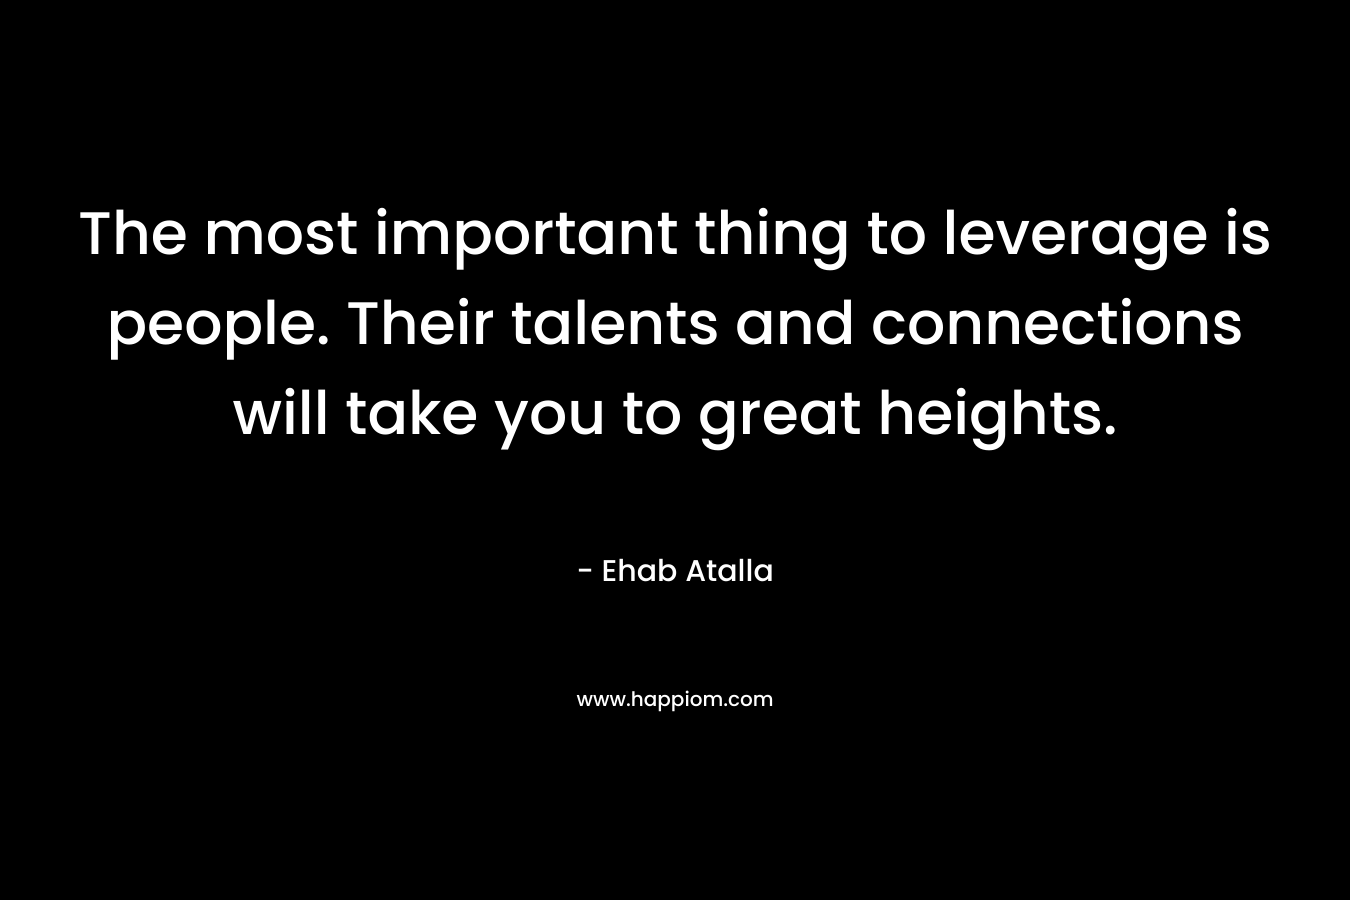 The most important thing to leverage is people. Their talents and connections will take you to great heights.